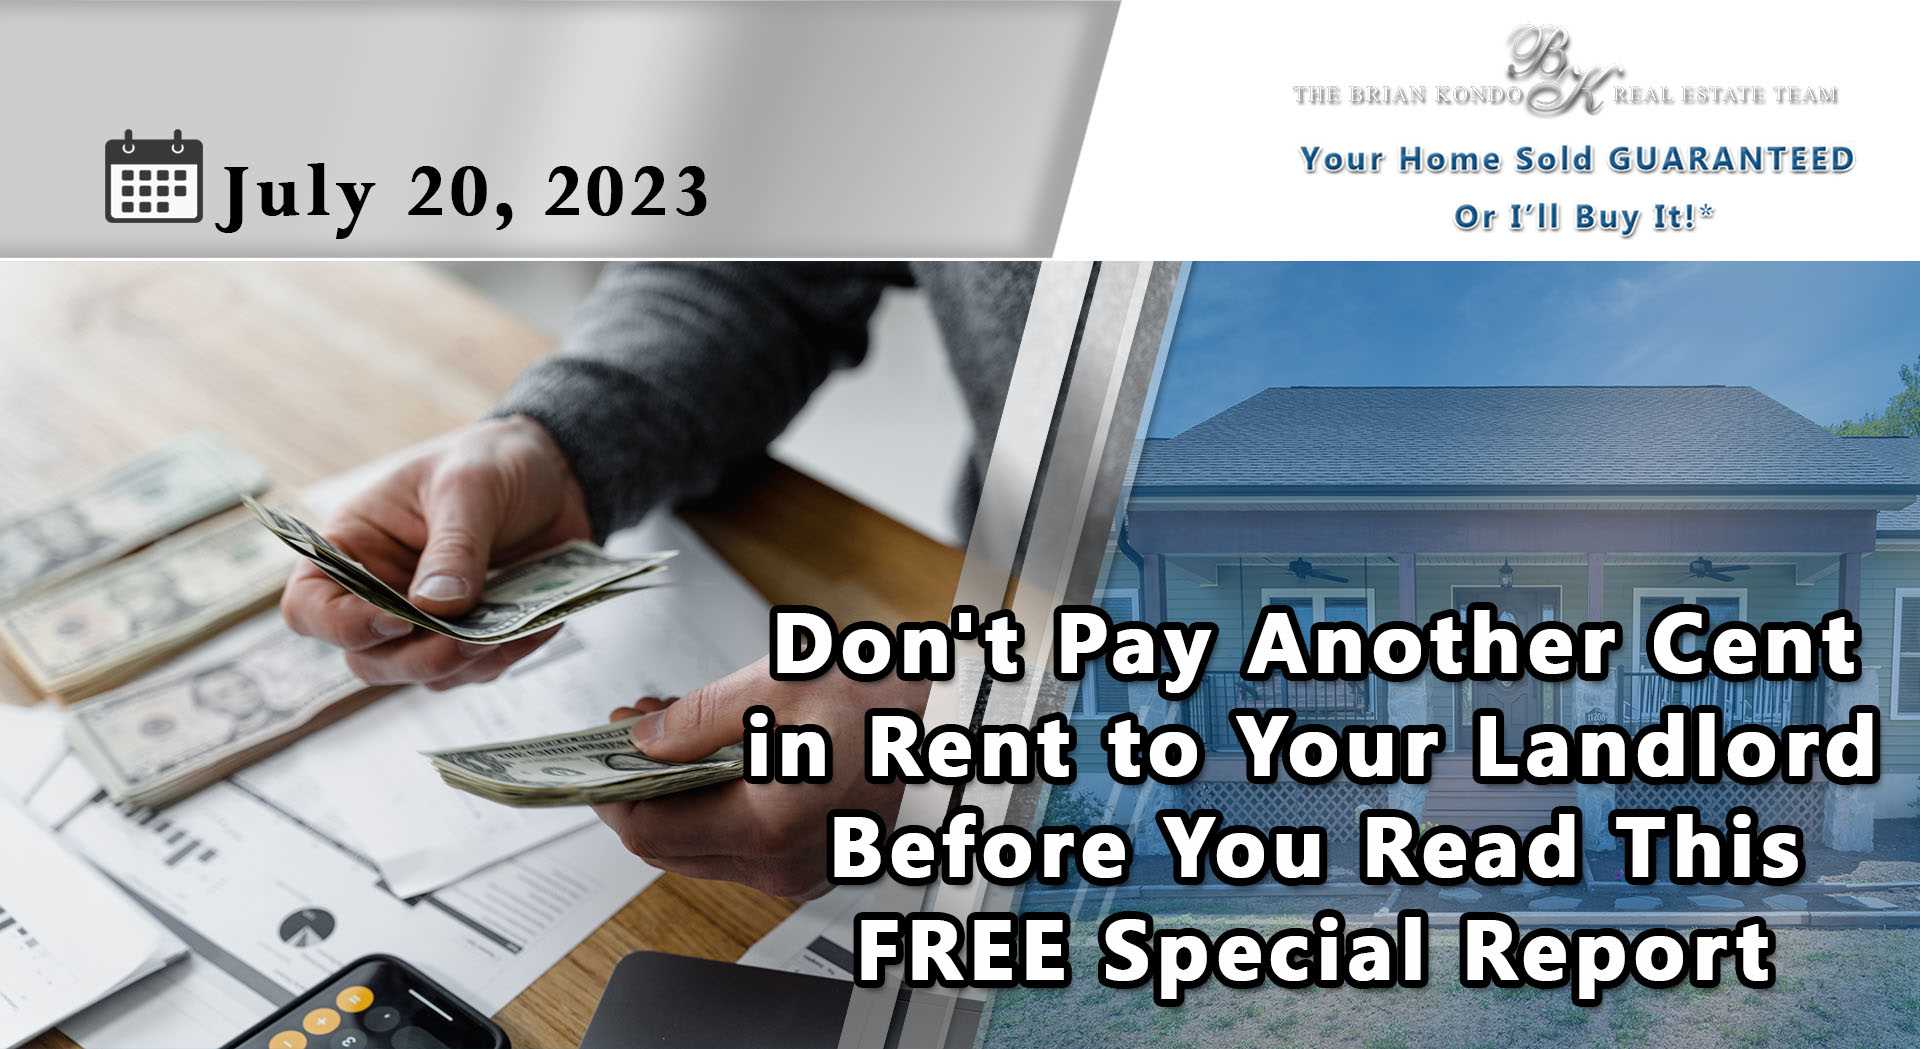 Don't Pay Another Cent in Rent to Your Landlord Before You Read this FREE Special Report